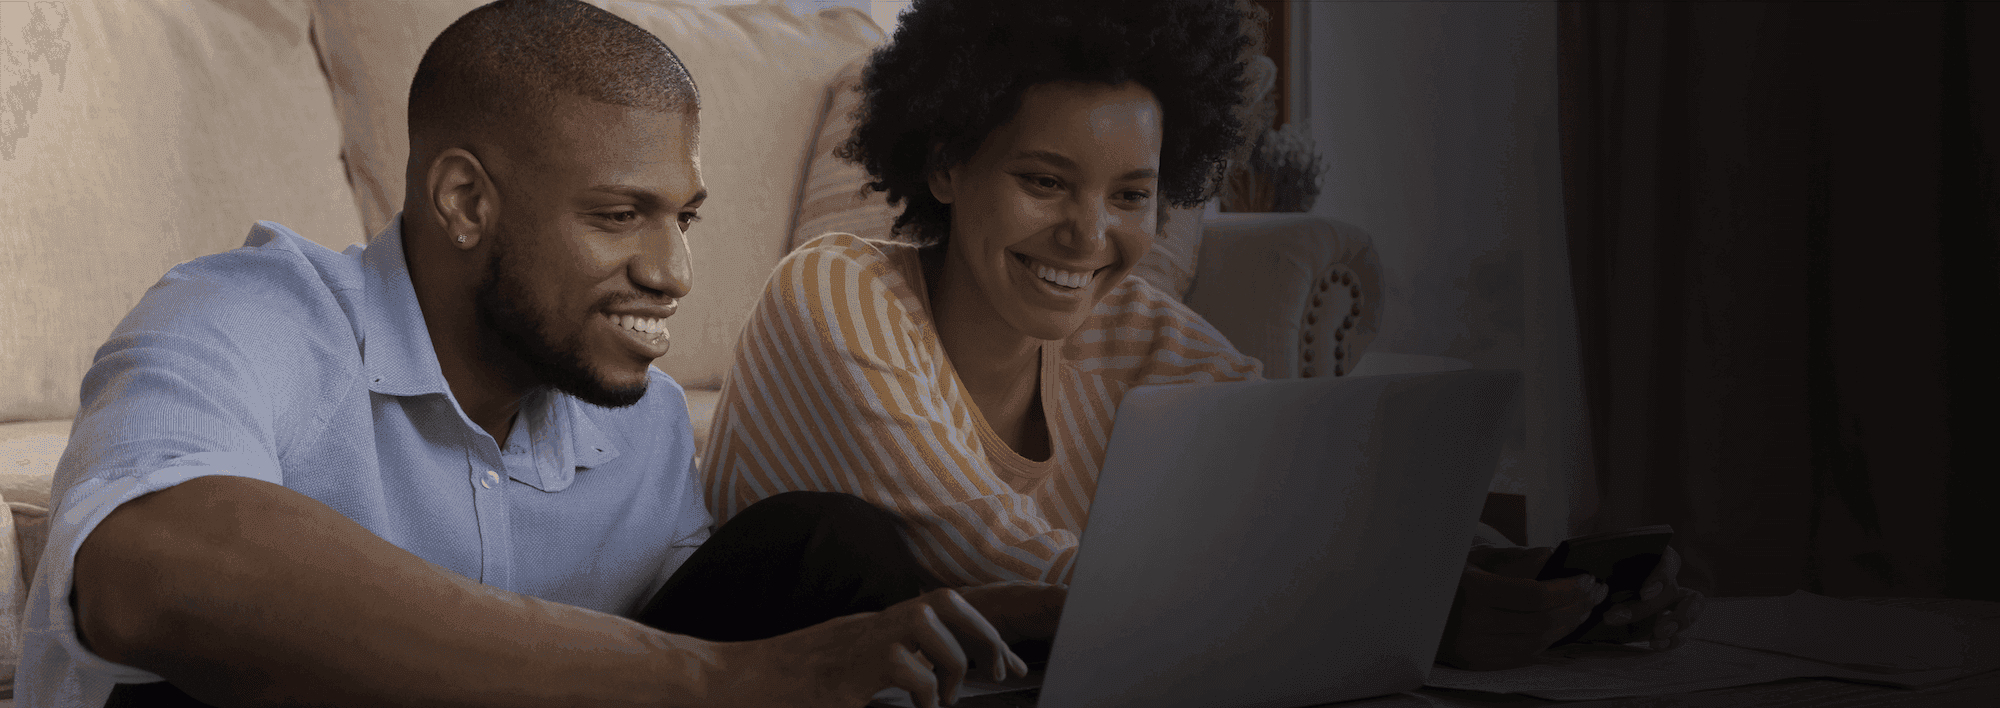 man and woman looking at laptop smiling